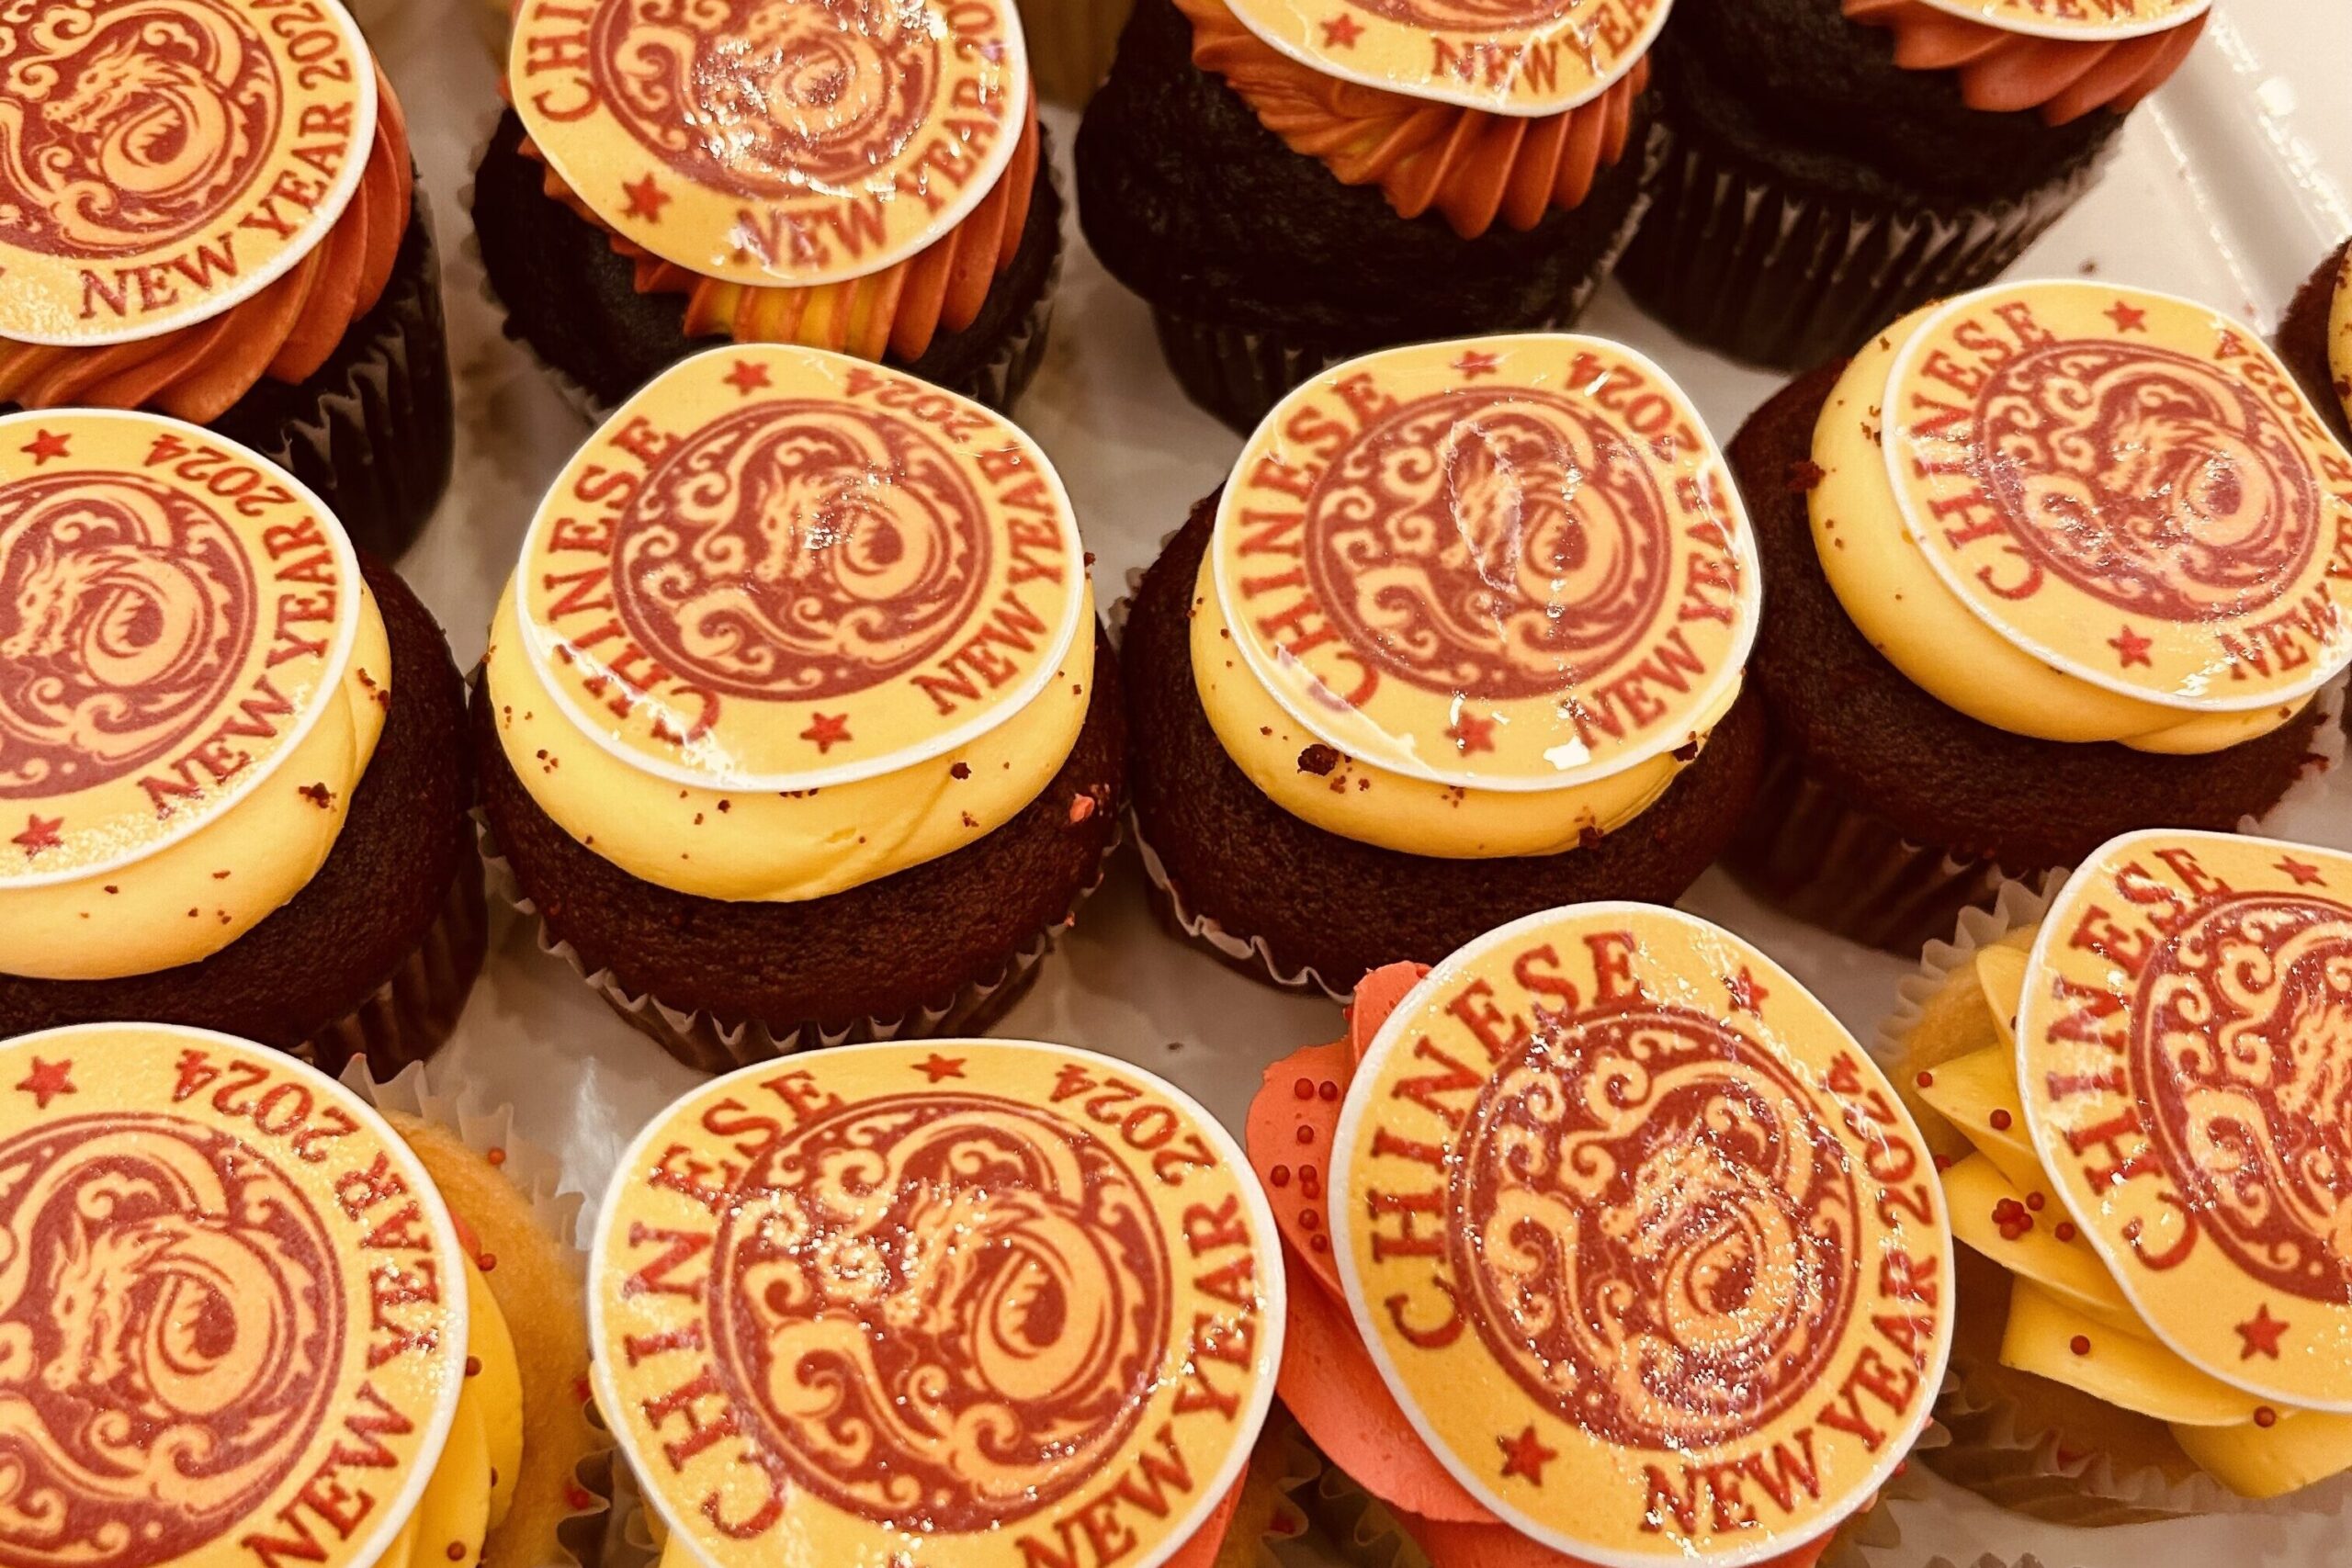 Rave Catering's Lunar New Year cupcakes